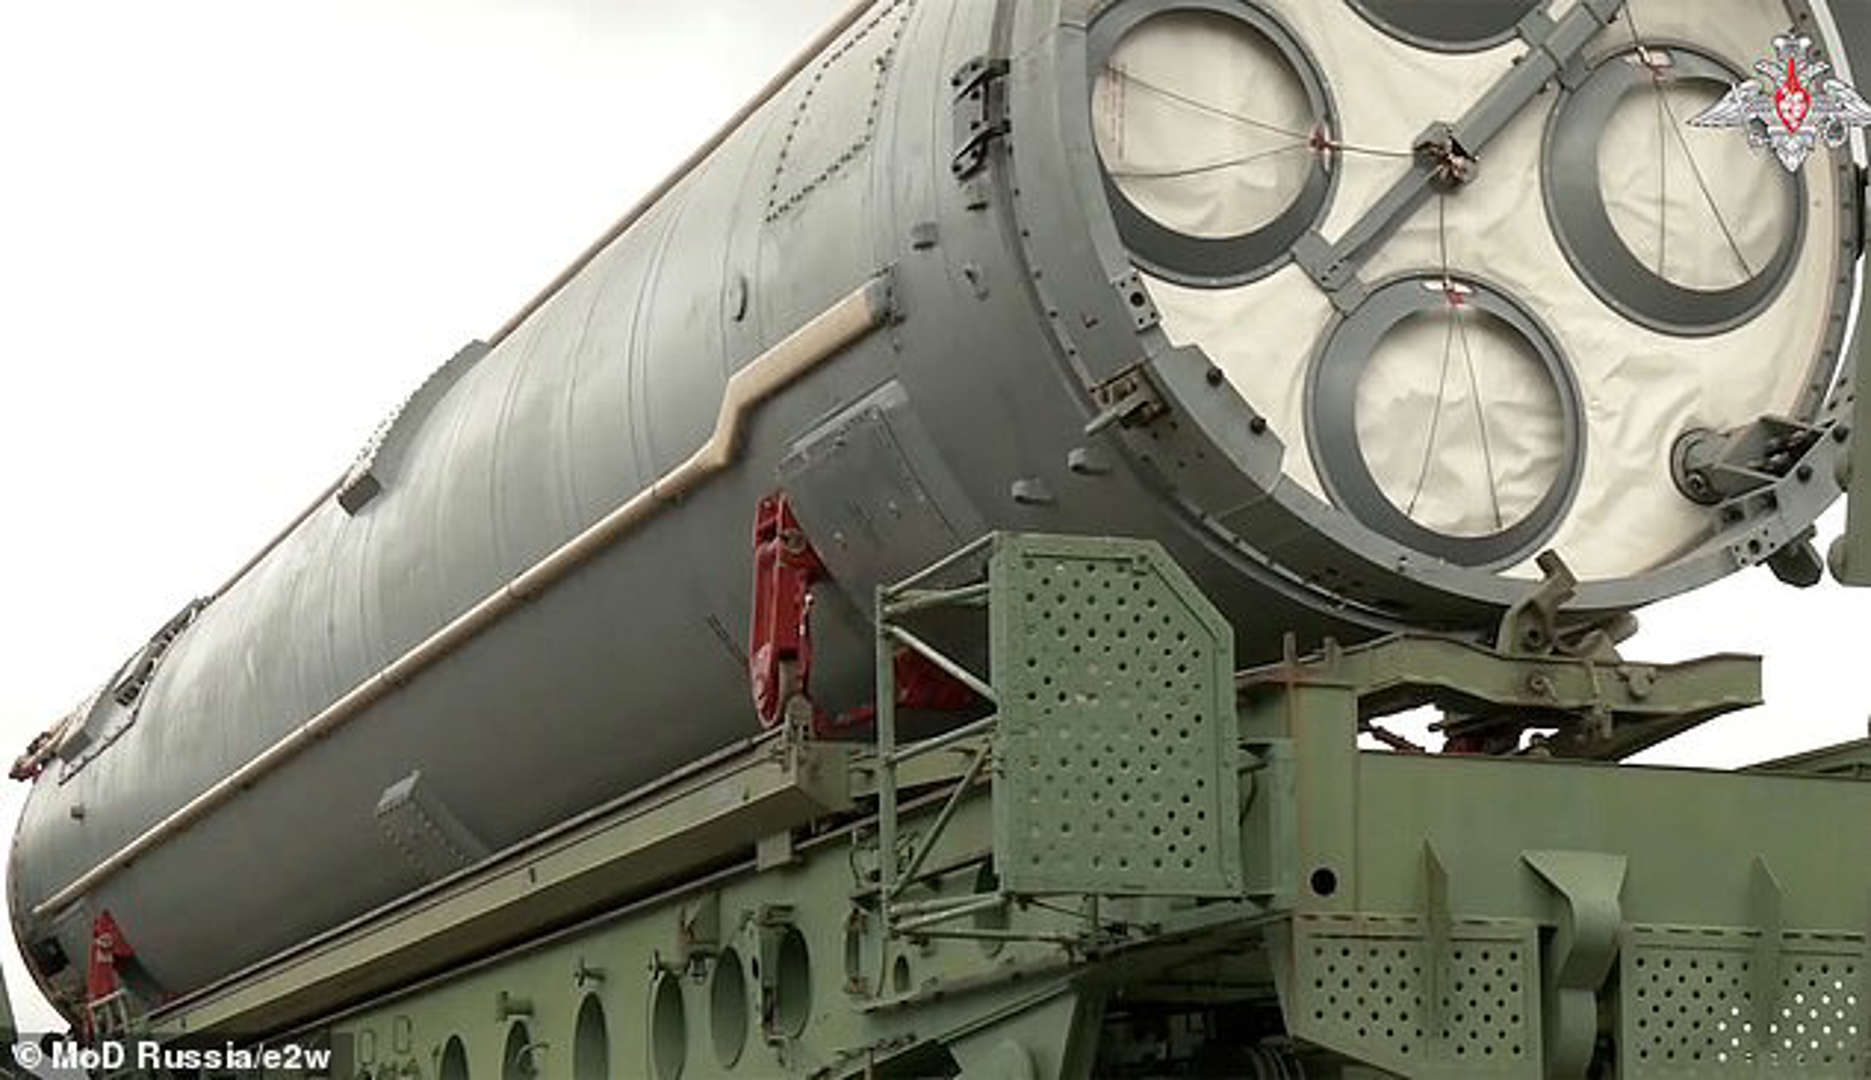 Video shows the missile being slowly loaded onto a tanker on its way to a launch site